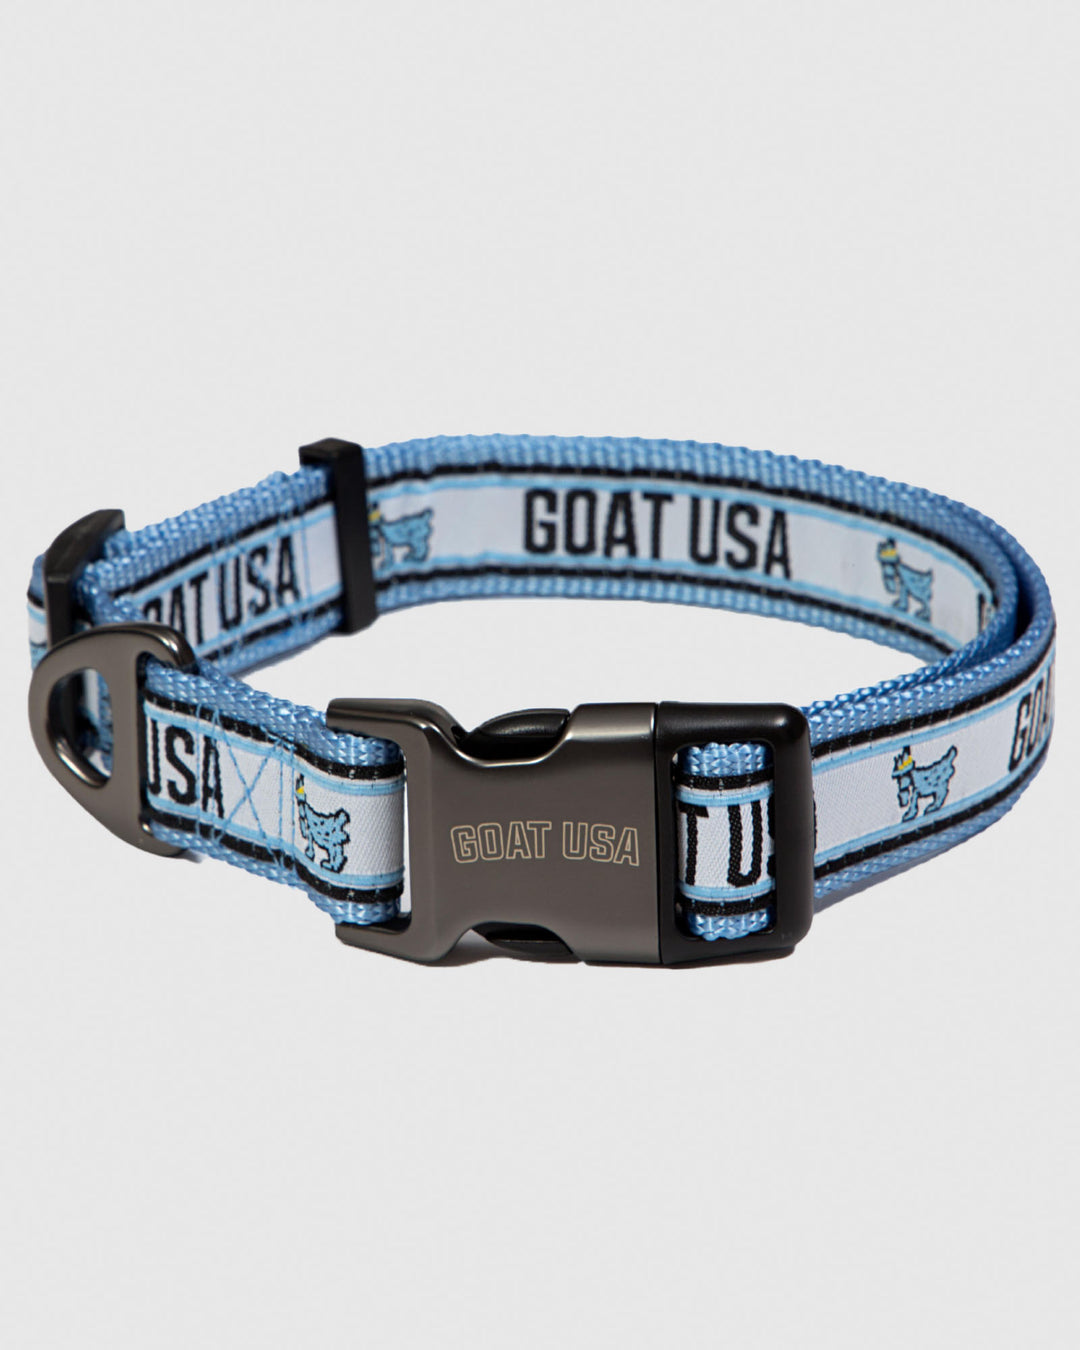 Blue and white dog collar with goats and says GOAT USA